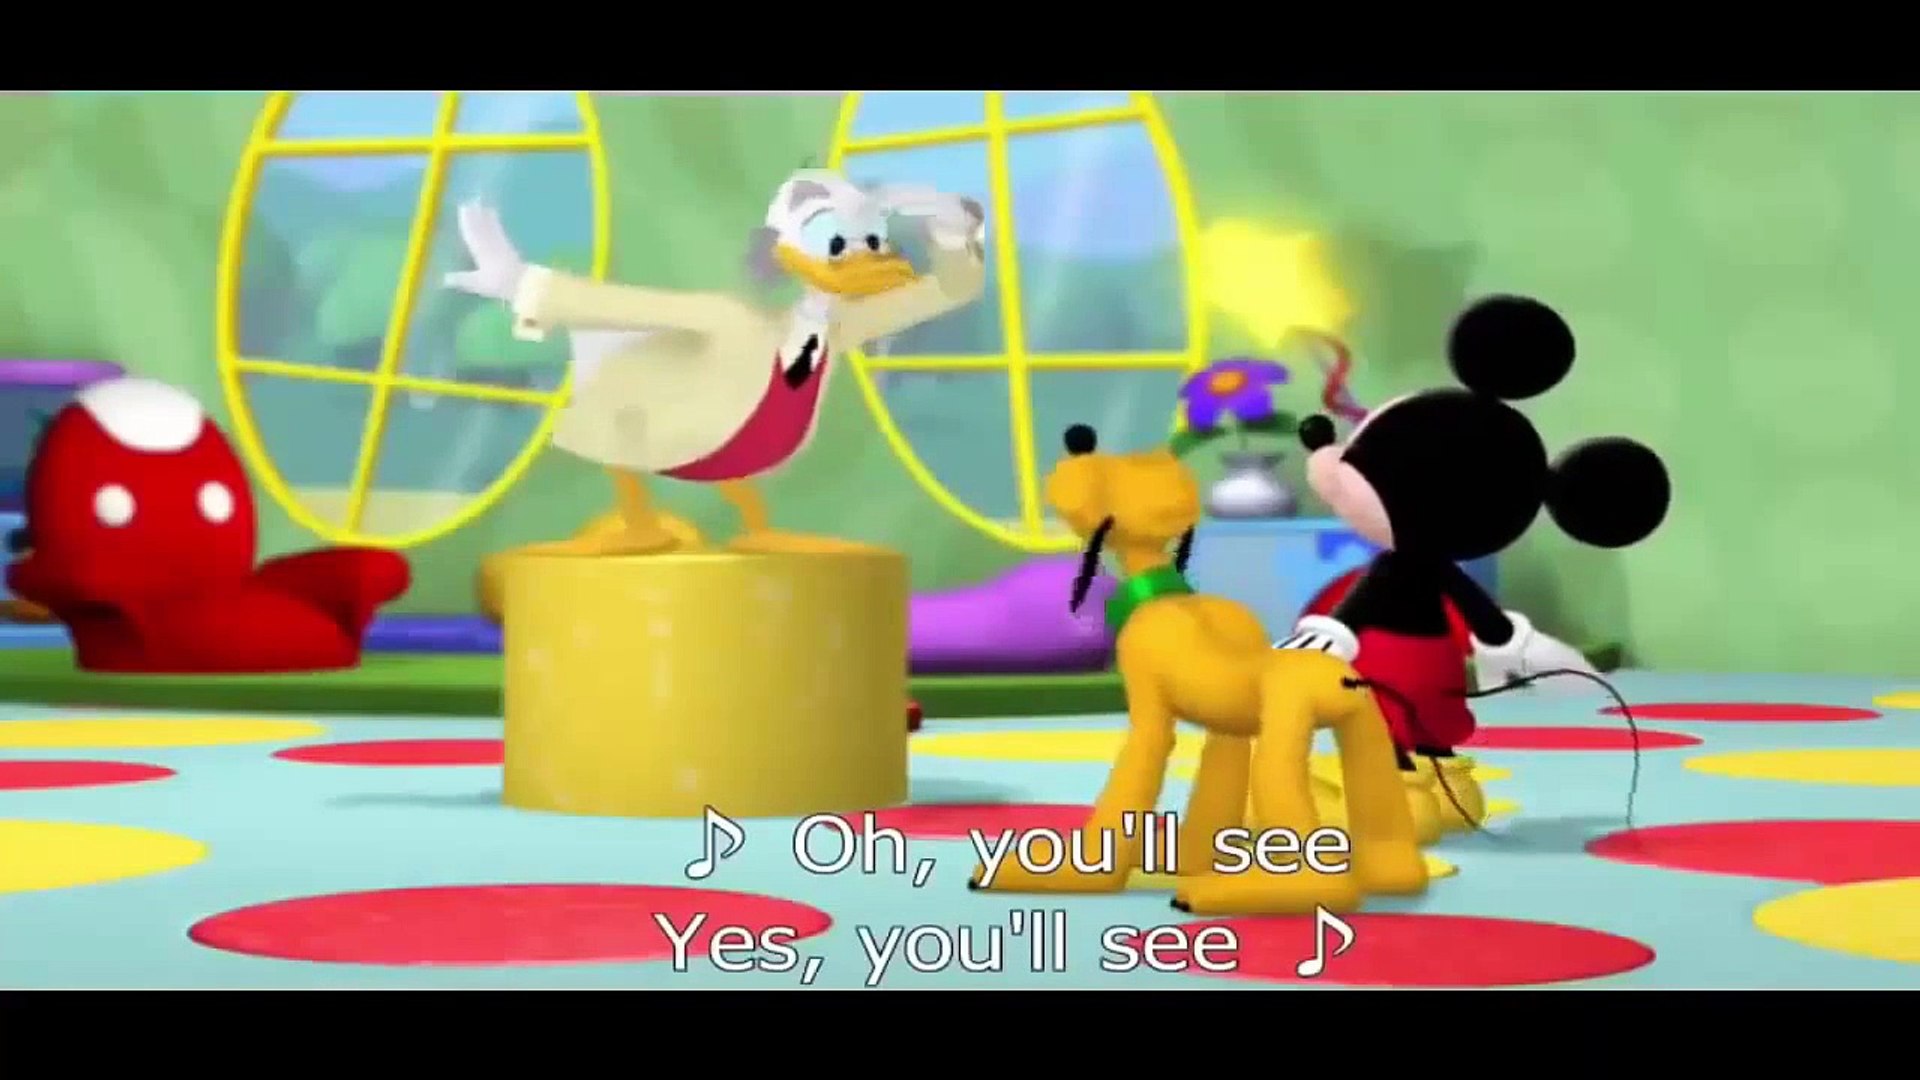 Watch Mickey Mouse Clubhouse Volume 10